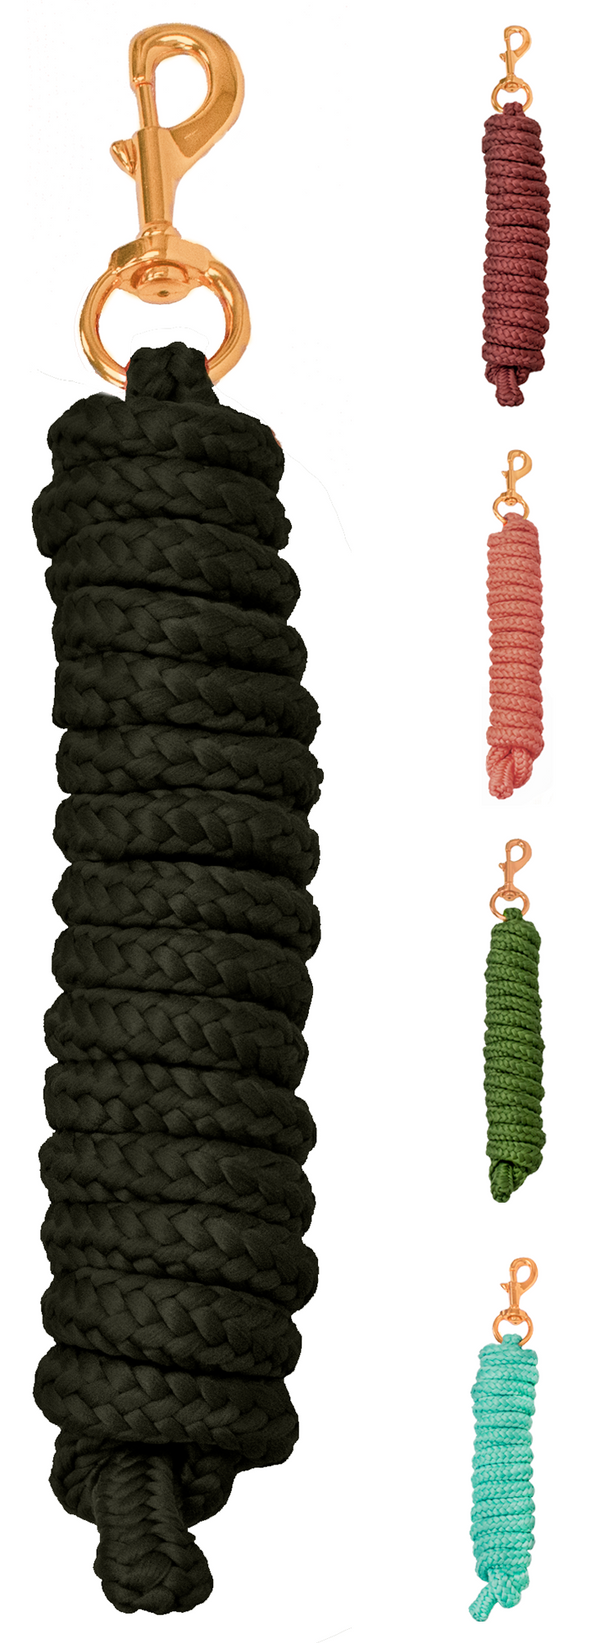 Derby Originals Premium Soft Braided Poly Lead Rope Lot of 2 - Available in Multiple Colors and Sizes